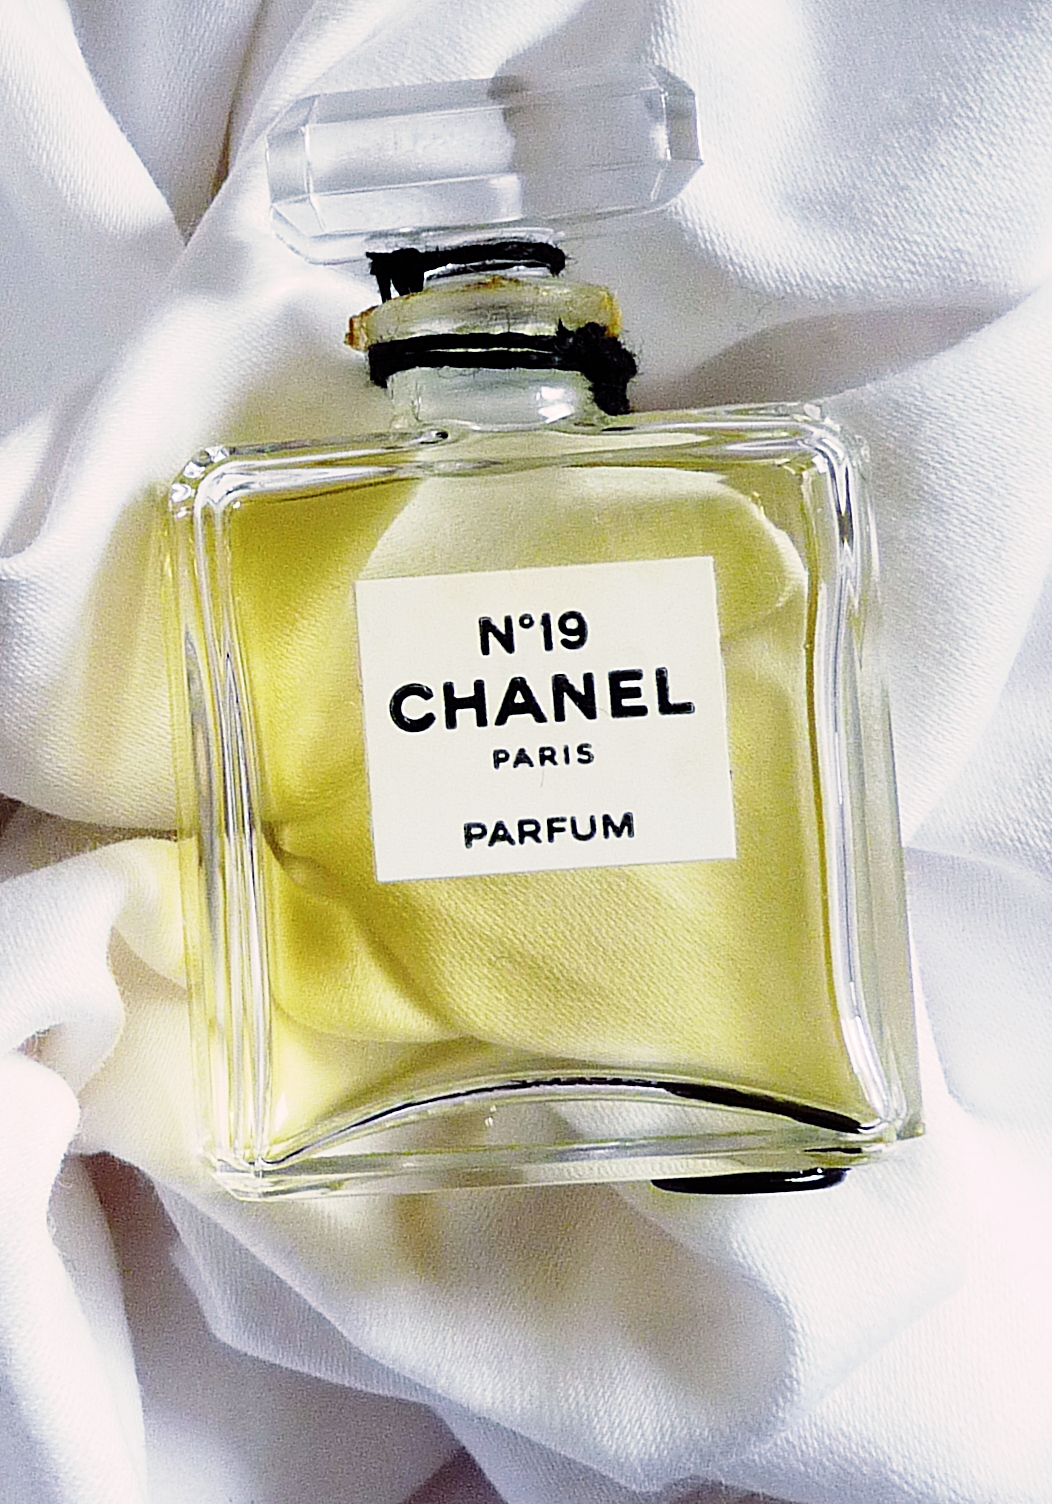 EVERY BEDROOM SHOULD SMELL OF : : CHANEL Nº5 (1921)